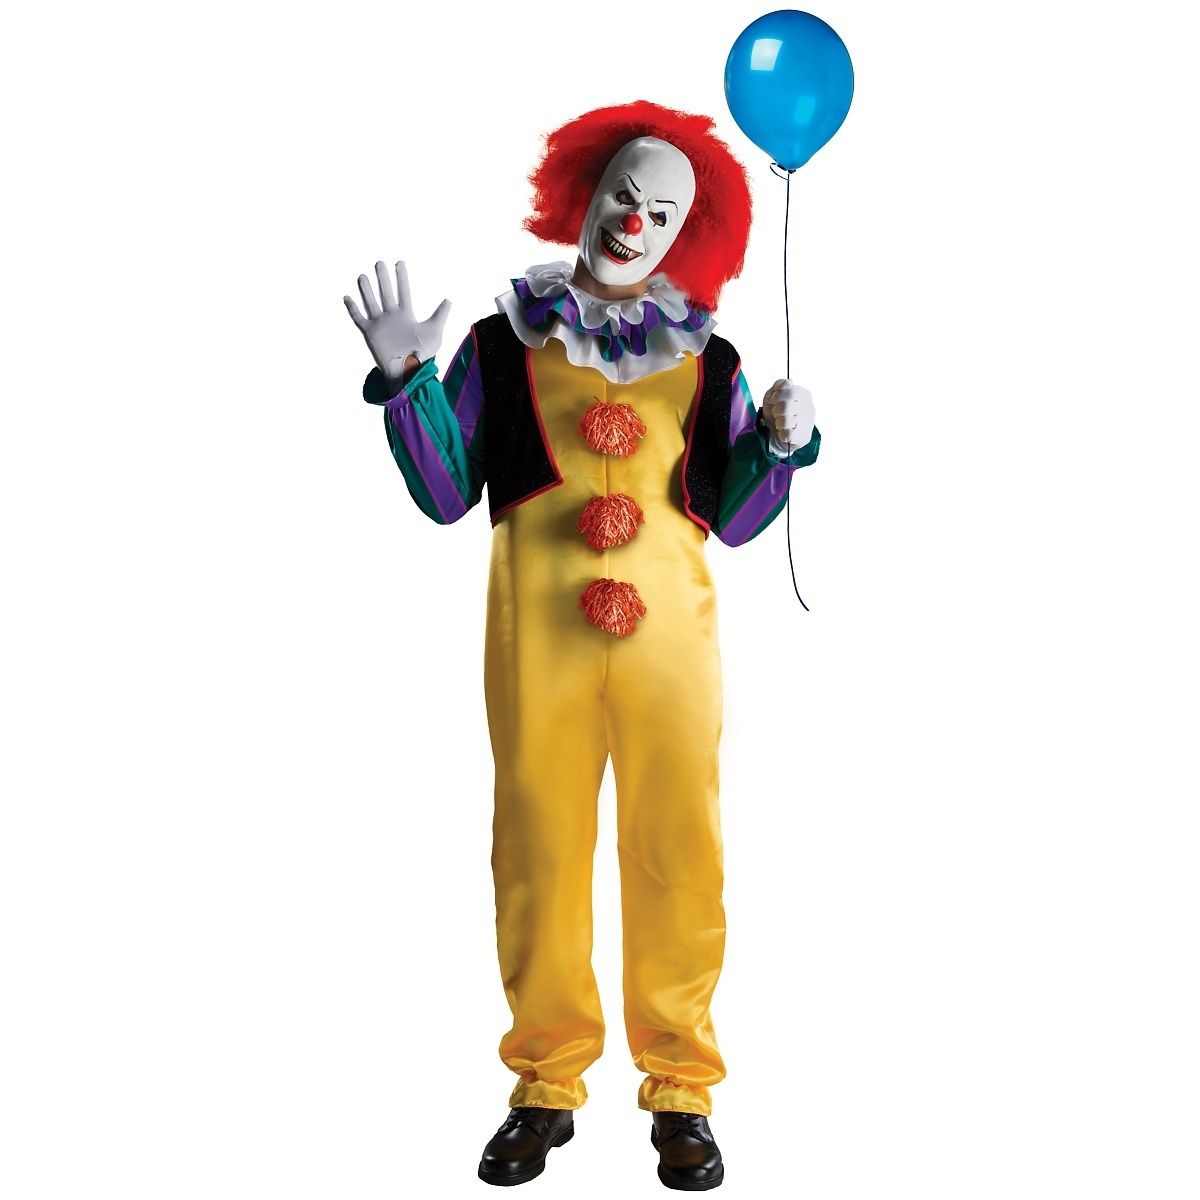 Pennywise the Clown Adult Halloween Costume—$47.29!